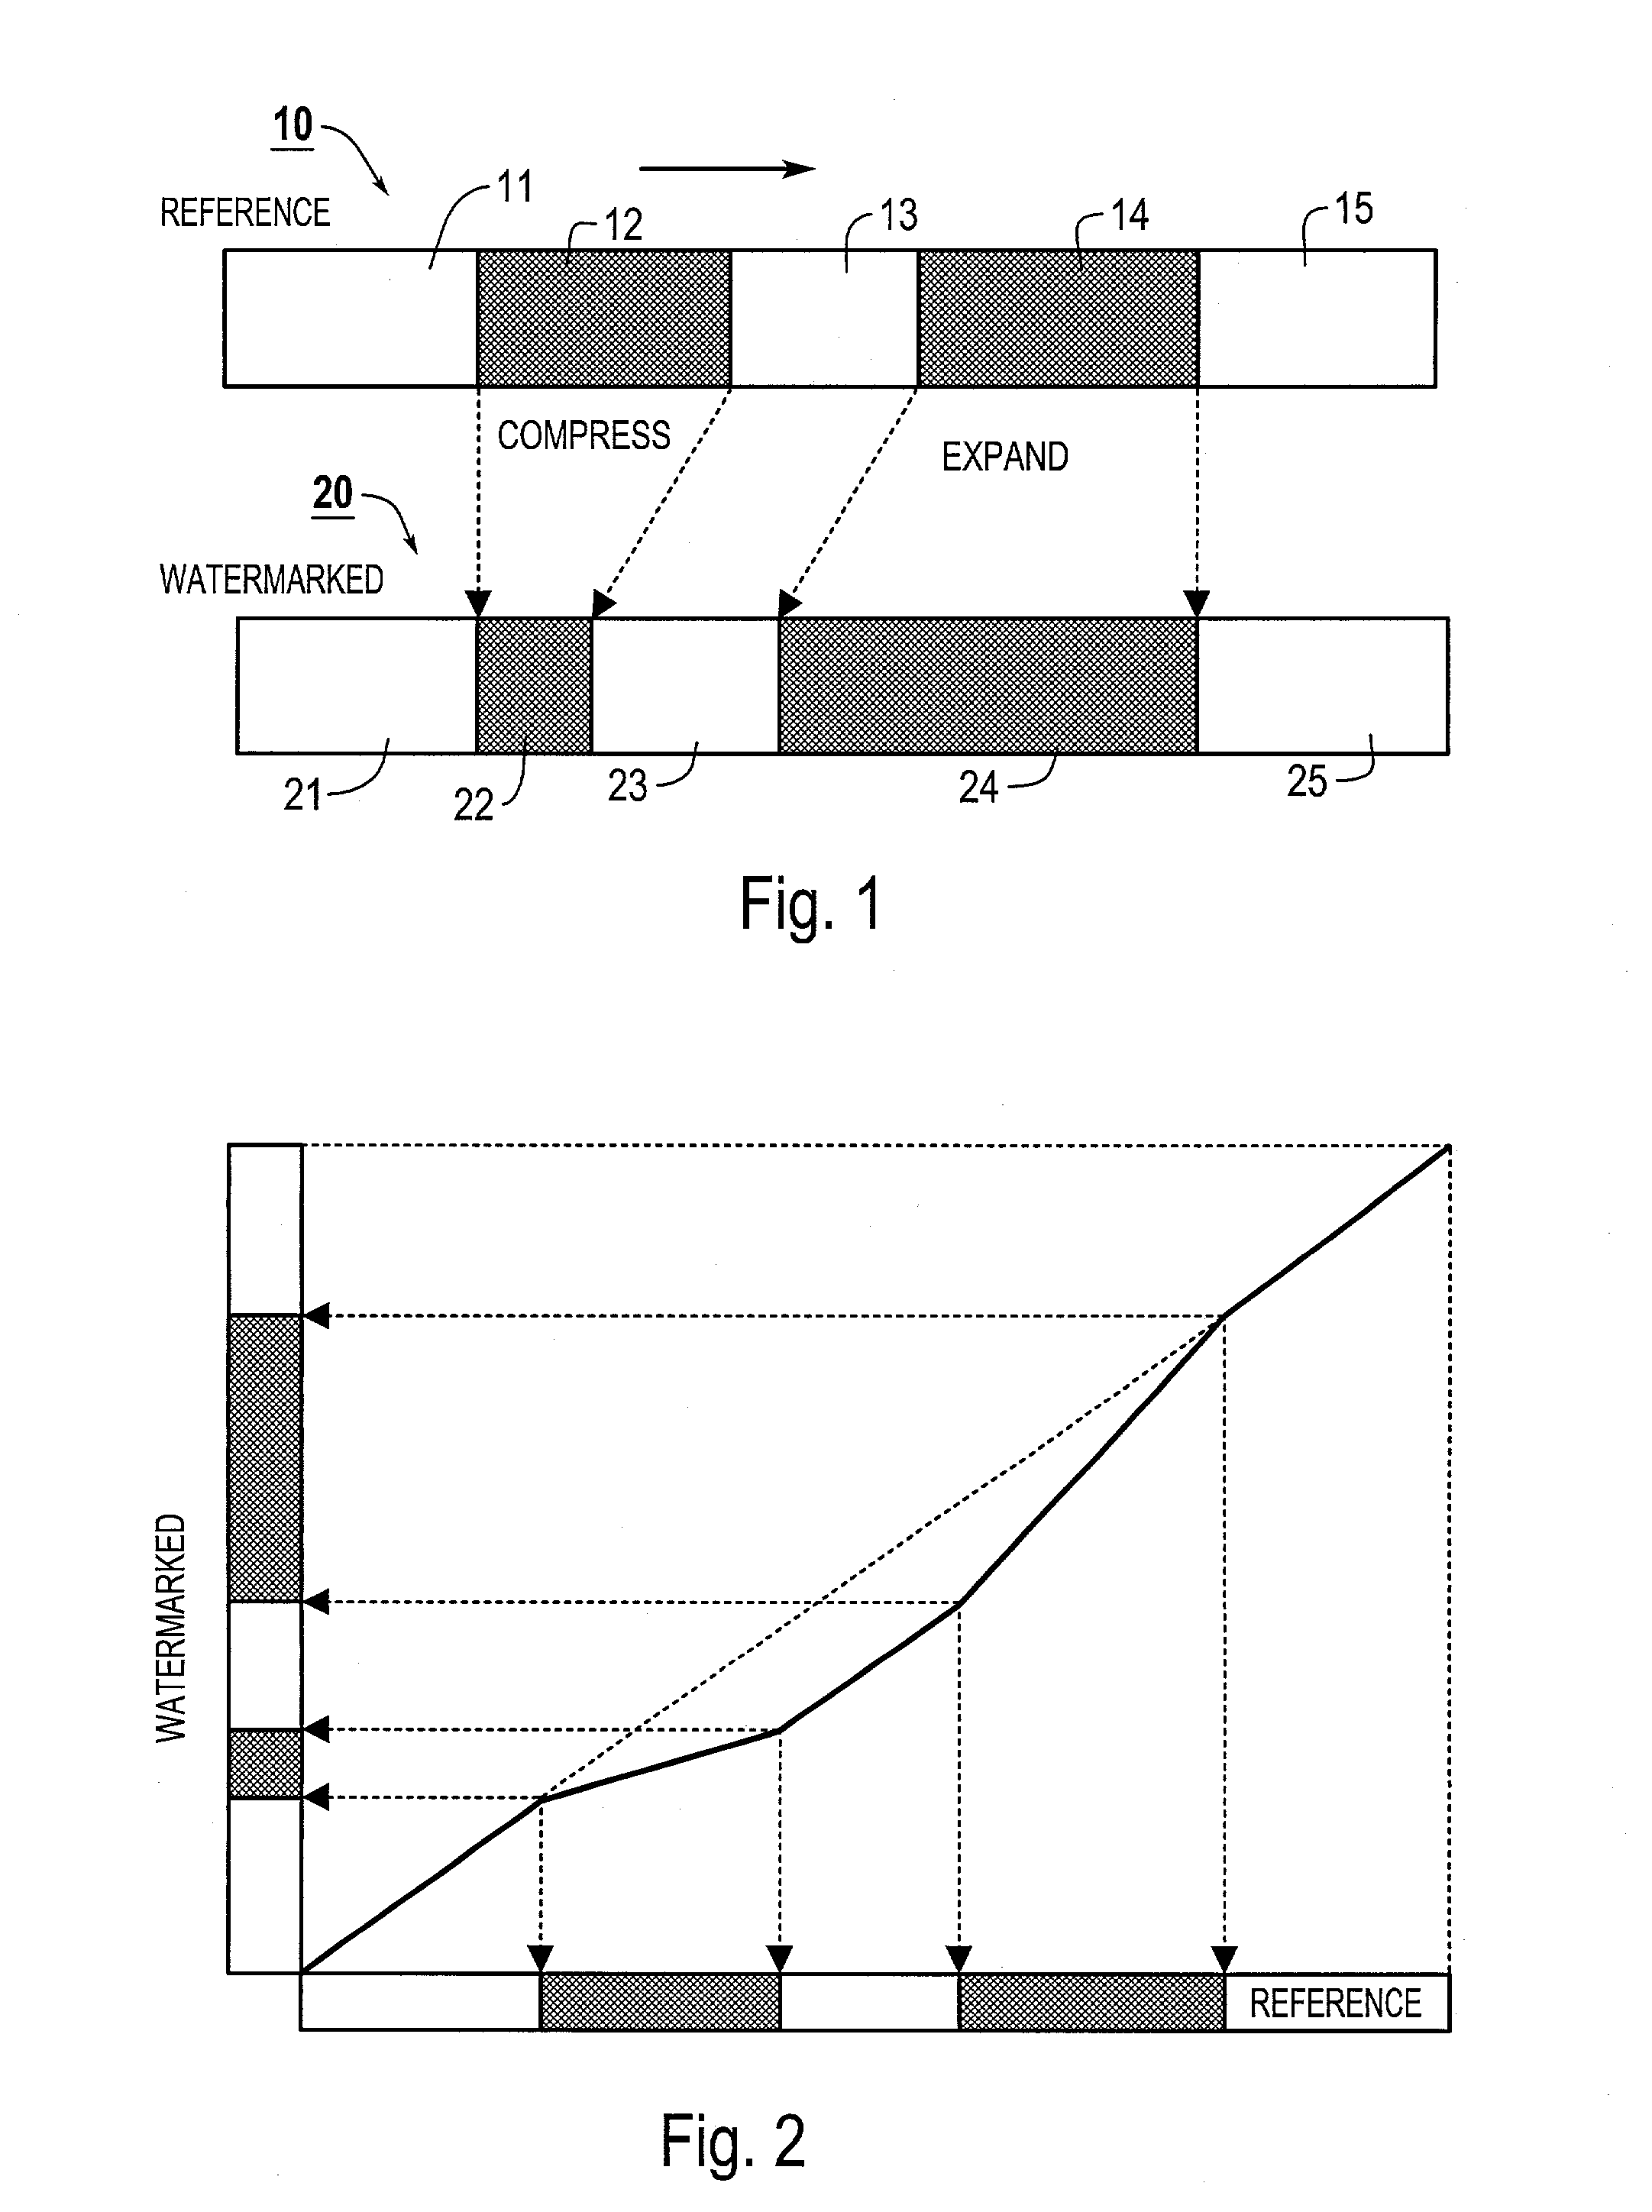 Systems and methods for embedding data by dimensional compression and expansion